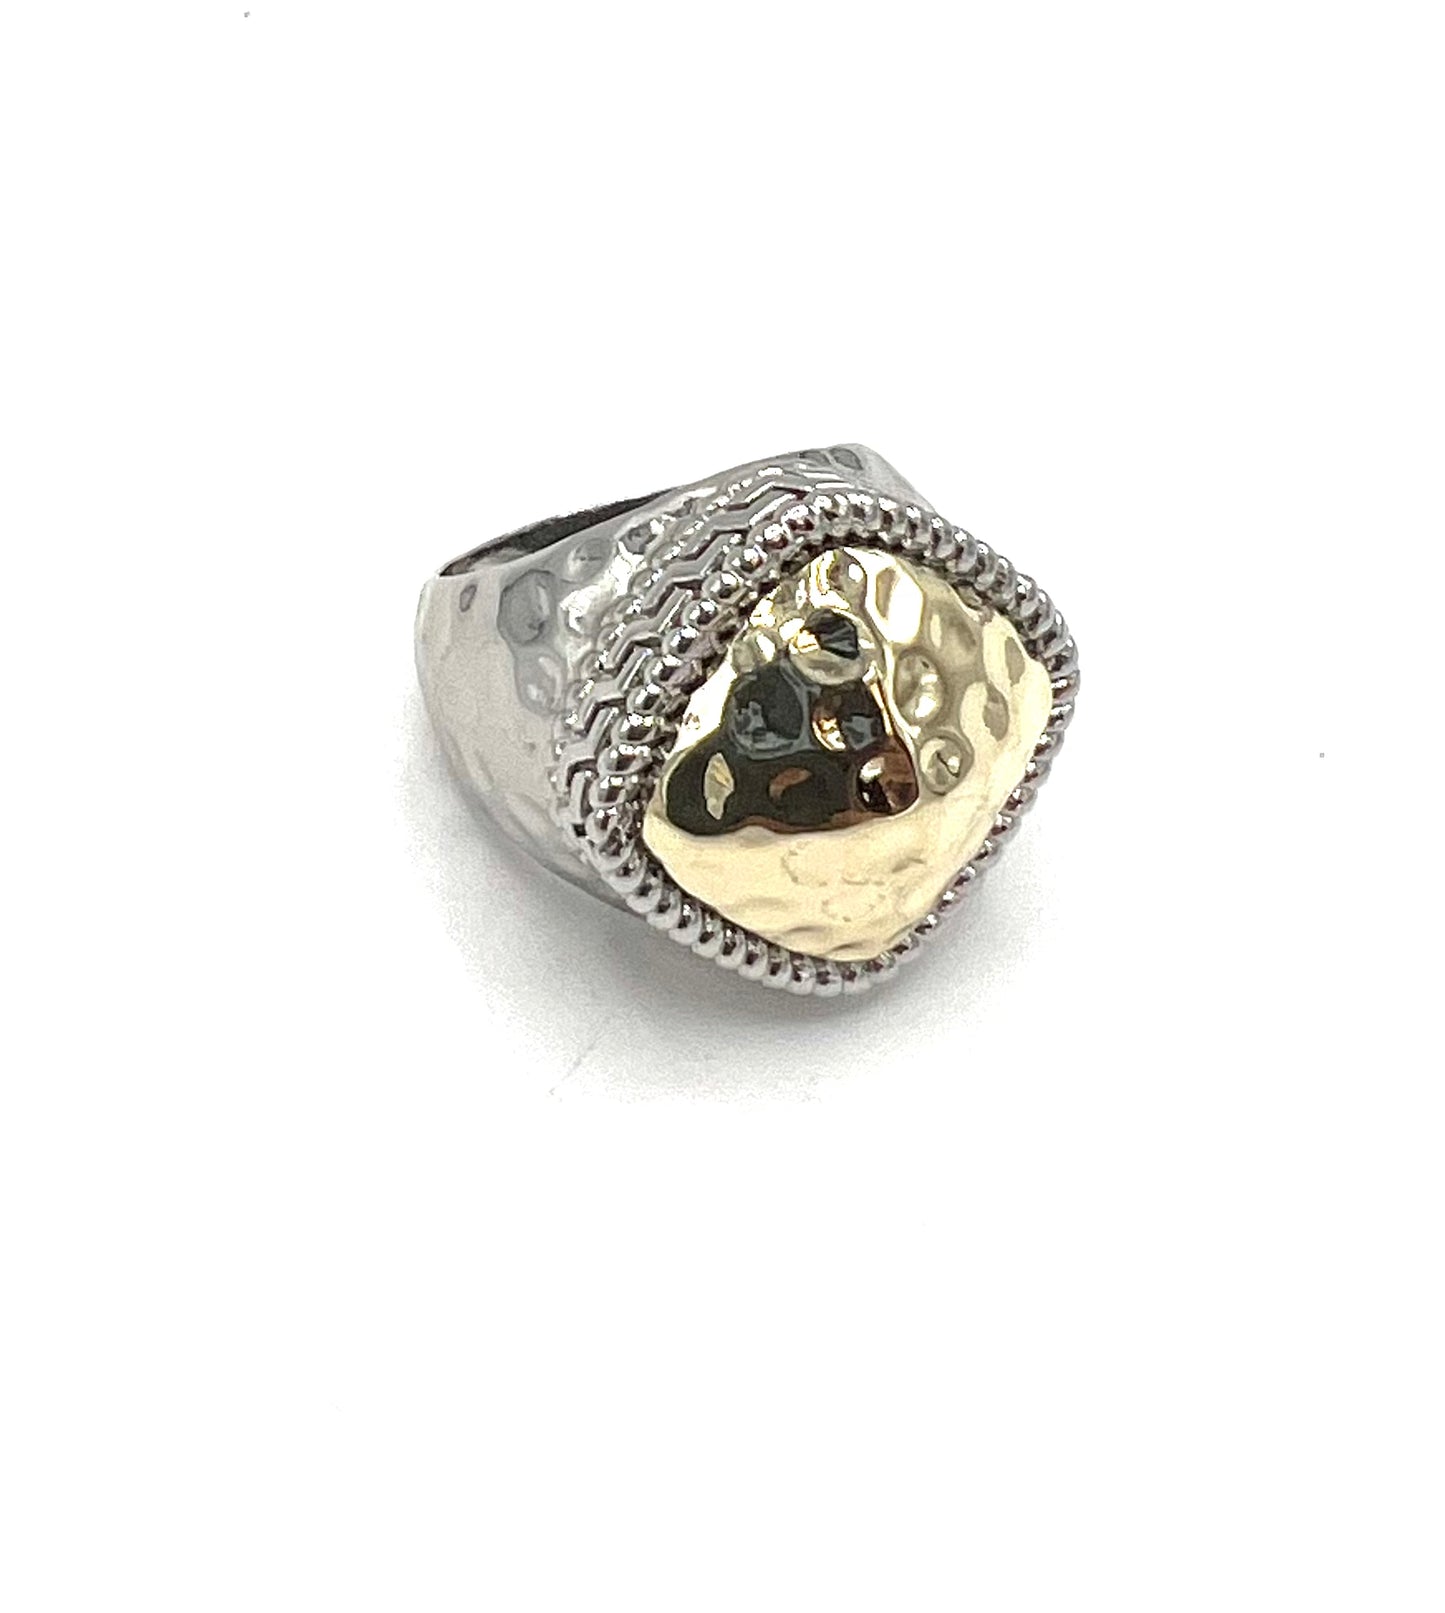 TWO TONE HAMMERED RING